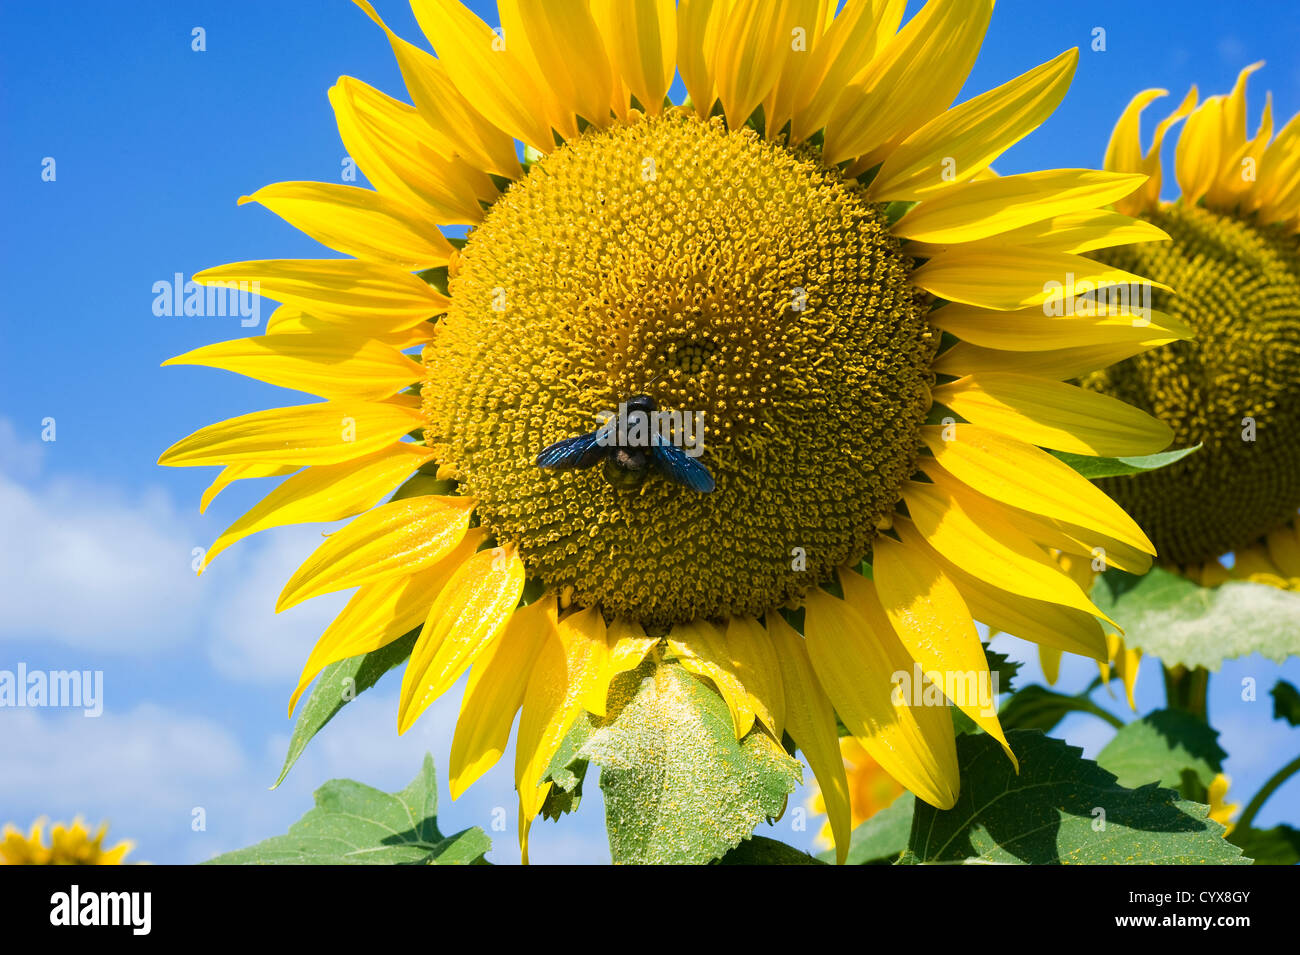 A bee sitting on a sunflower in a sunflower field. Stock Photo